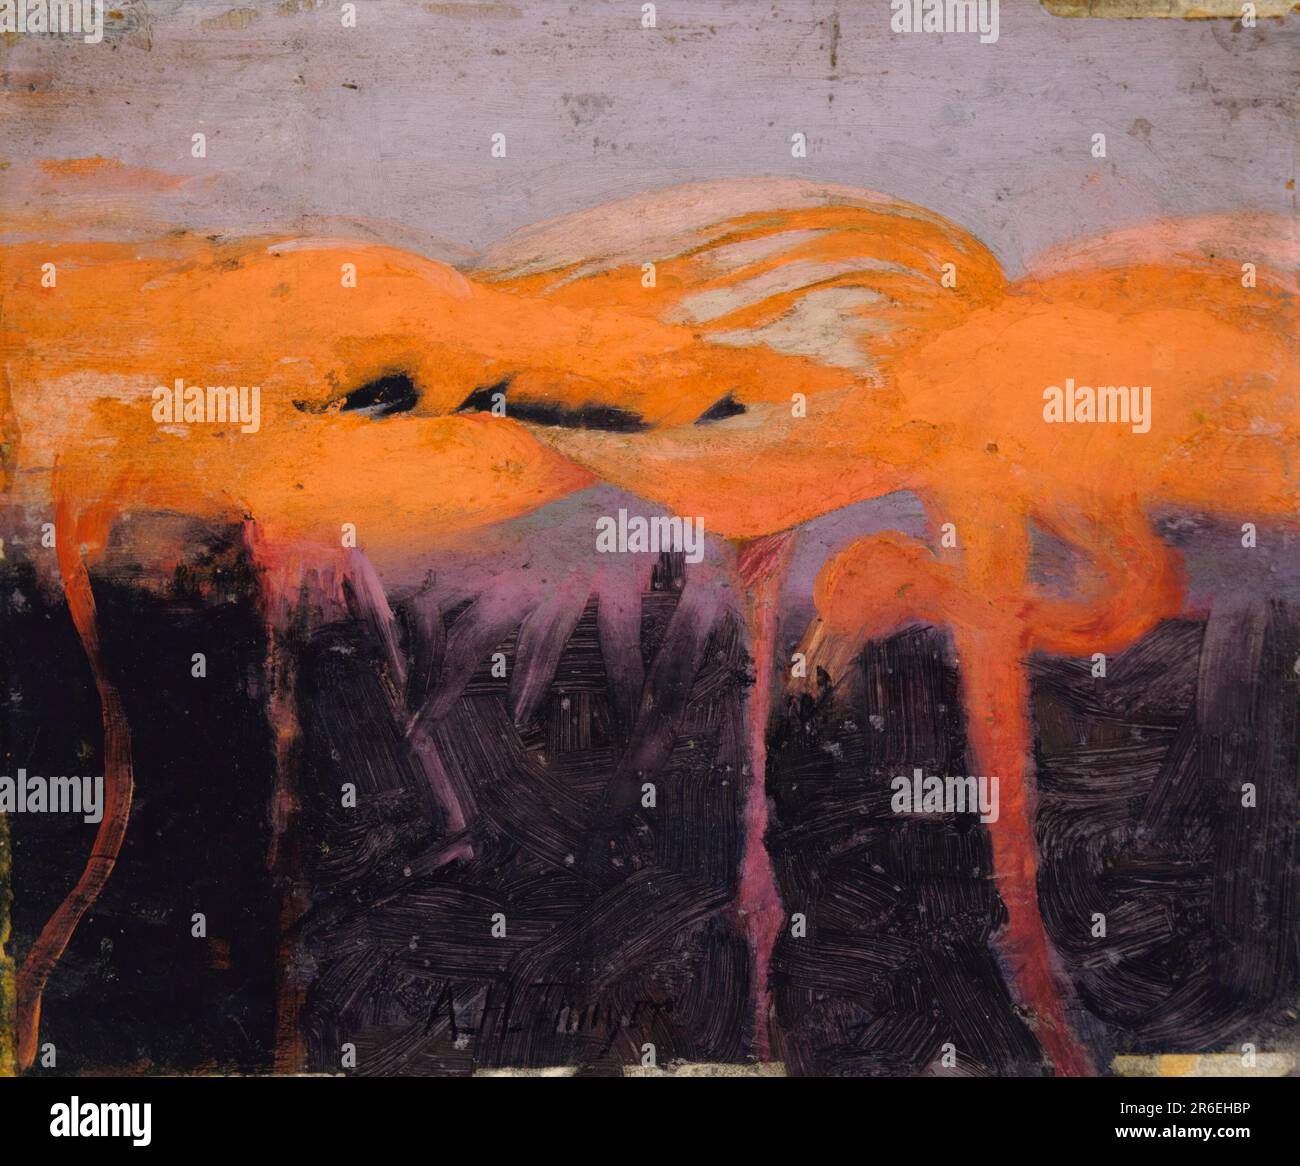 Red Flamingoes, study for book Concealing Coloration in the Animal Kingdom. oil on wood. Date: ca. 1905-1909. Museum: Smithsonian American Art Museum. Stock Photo